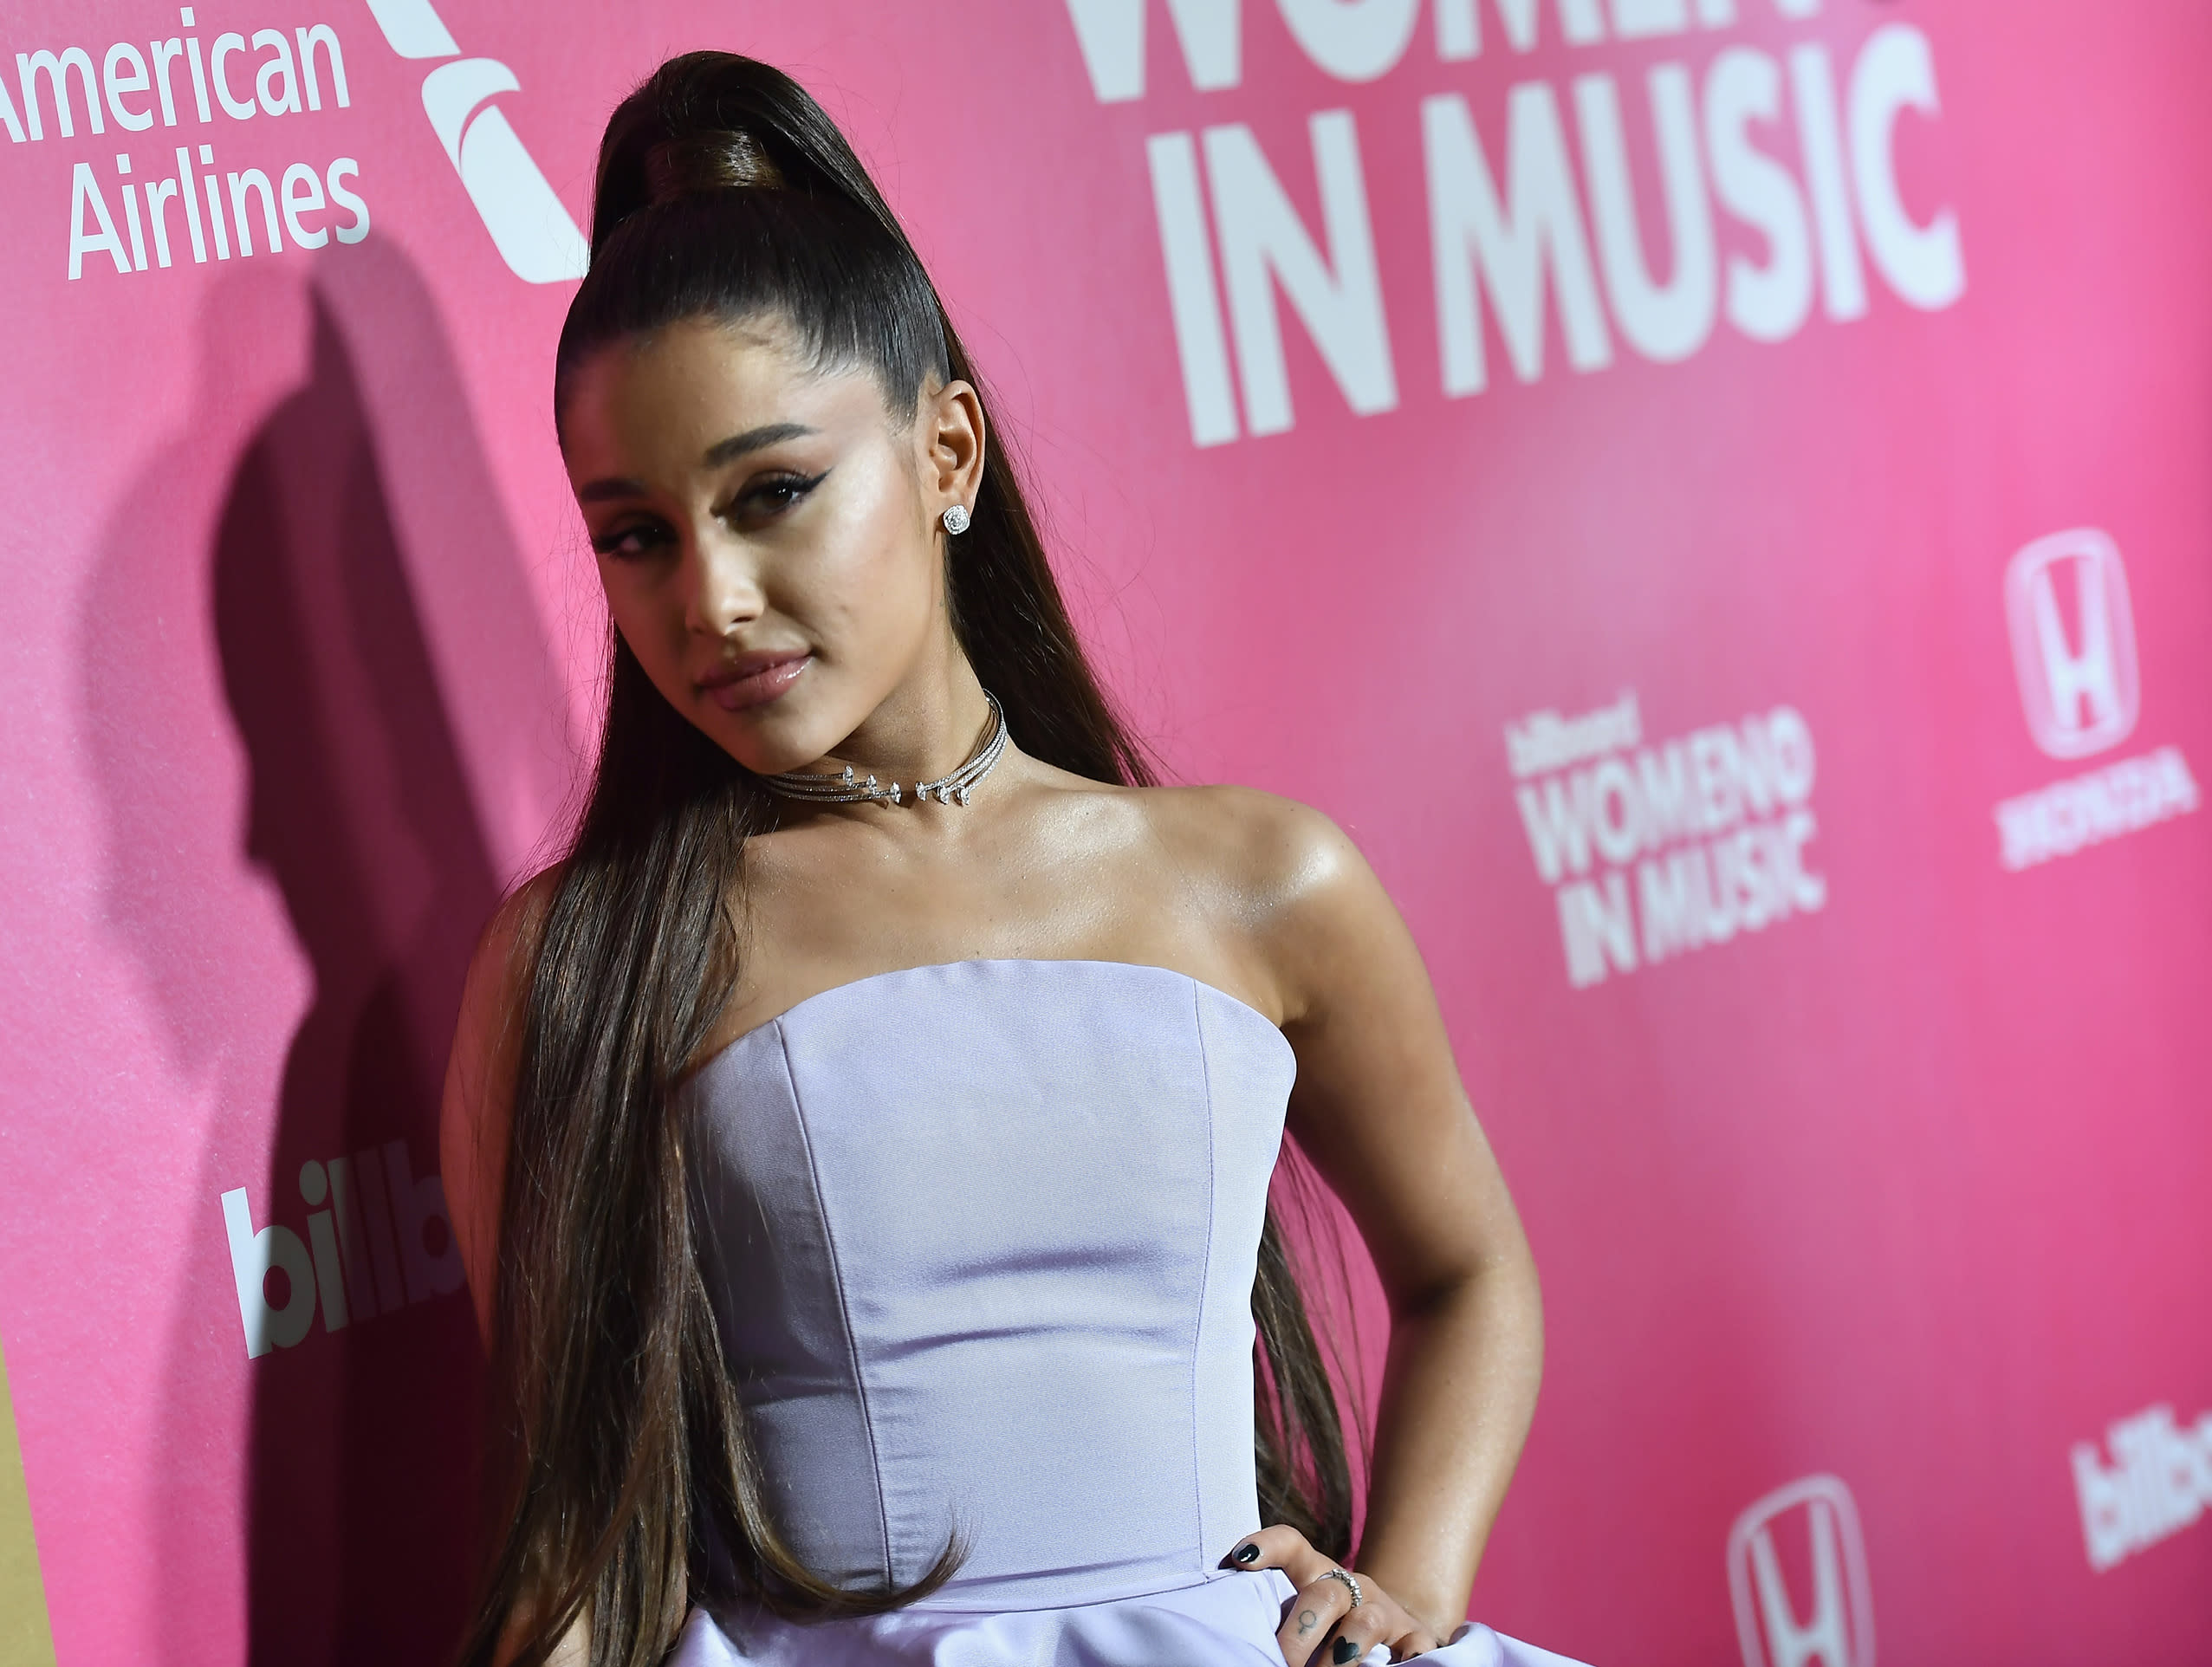 Ariana Grande May Be Preparing To Release A Sweetener Tour